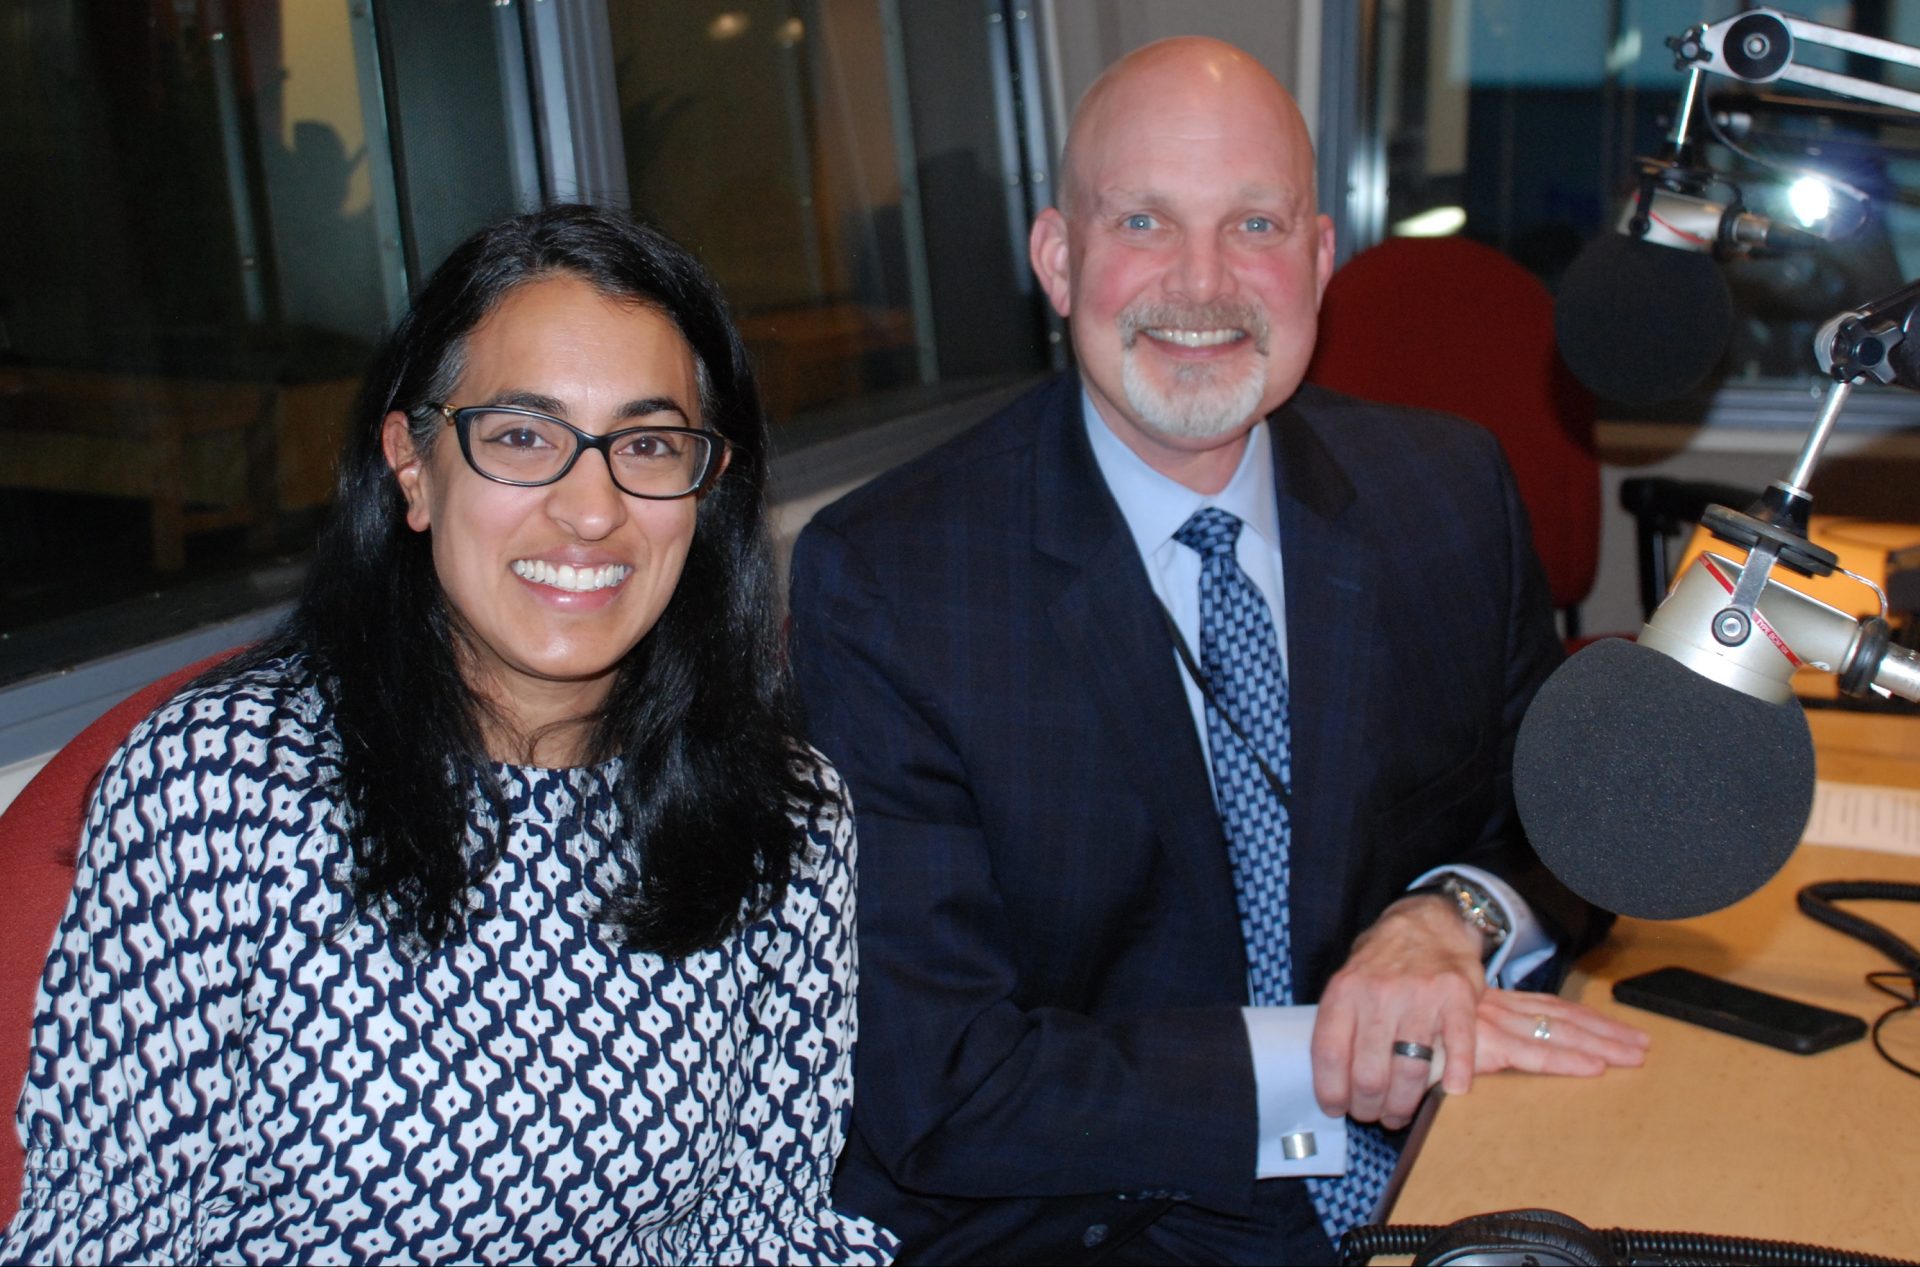 Dr. Purvi Panchal, M.D. and Mike McCormick appear on Smart Talk on March 4, 2020.